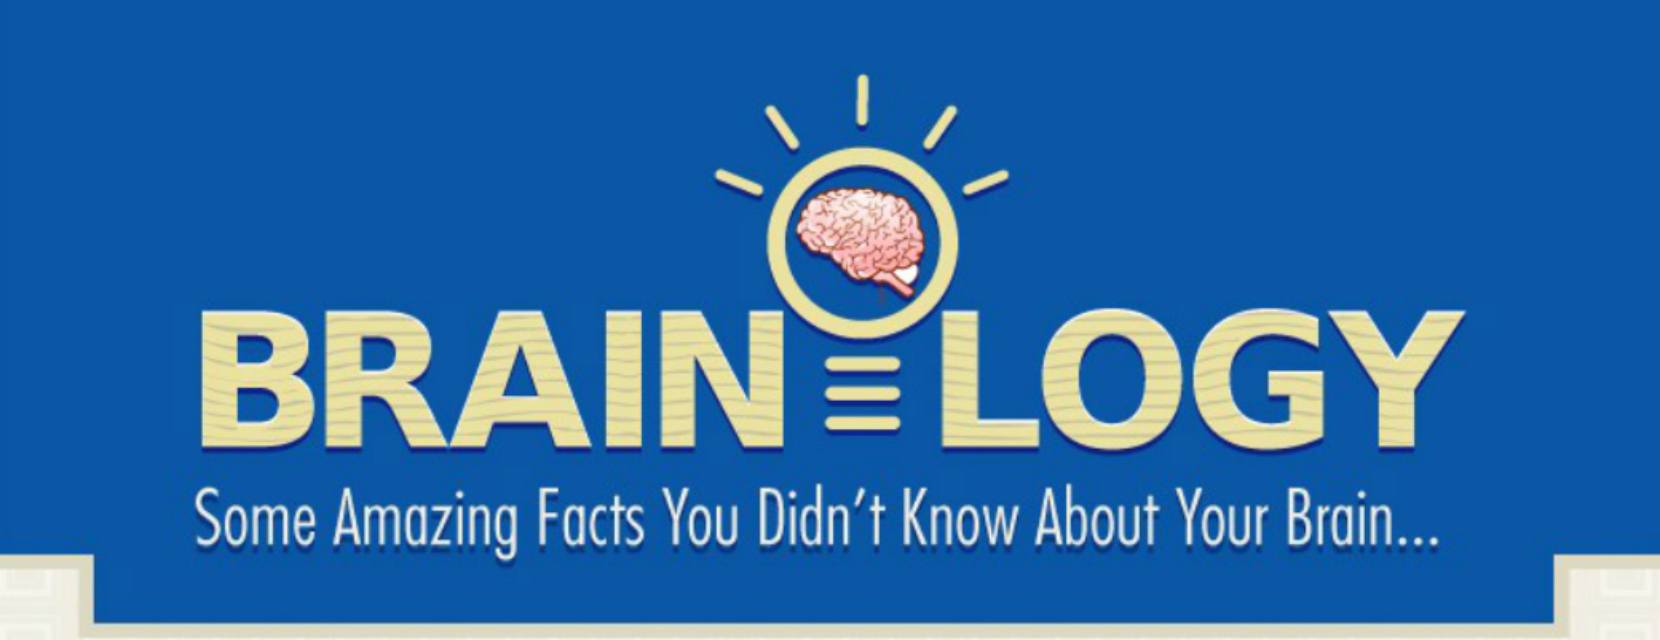 15 Things You Probably Didn’t Know About Your Brain